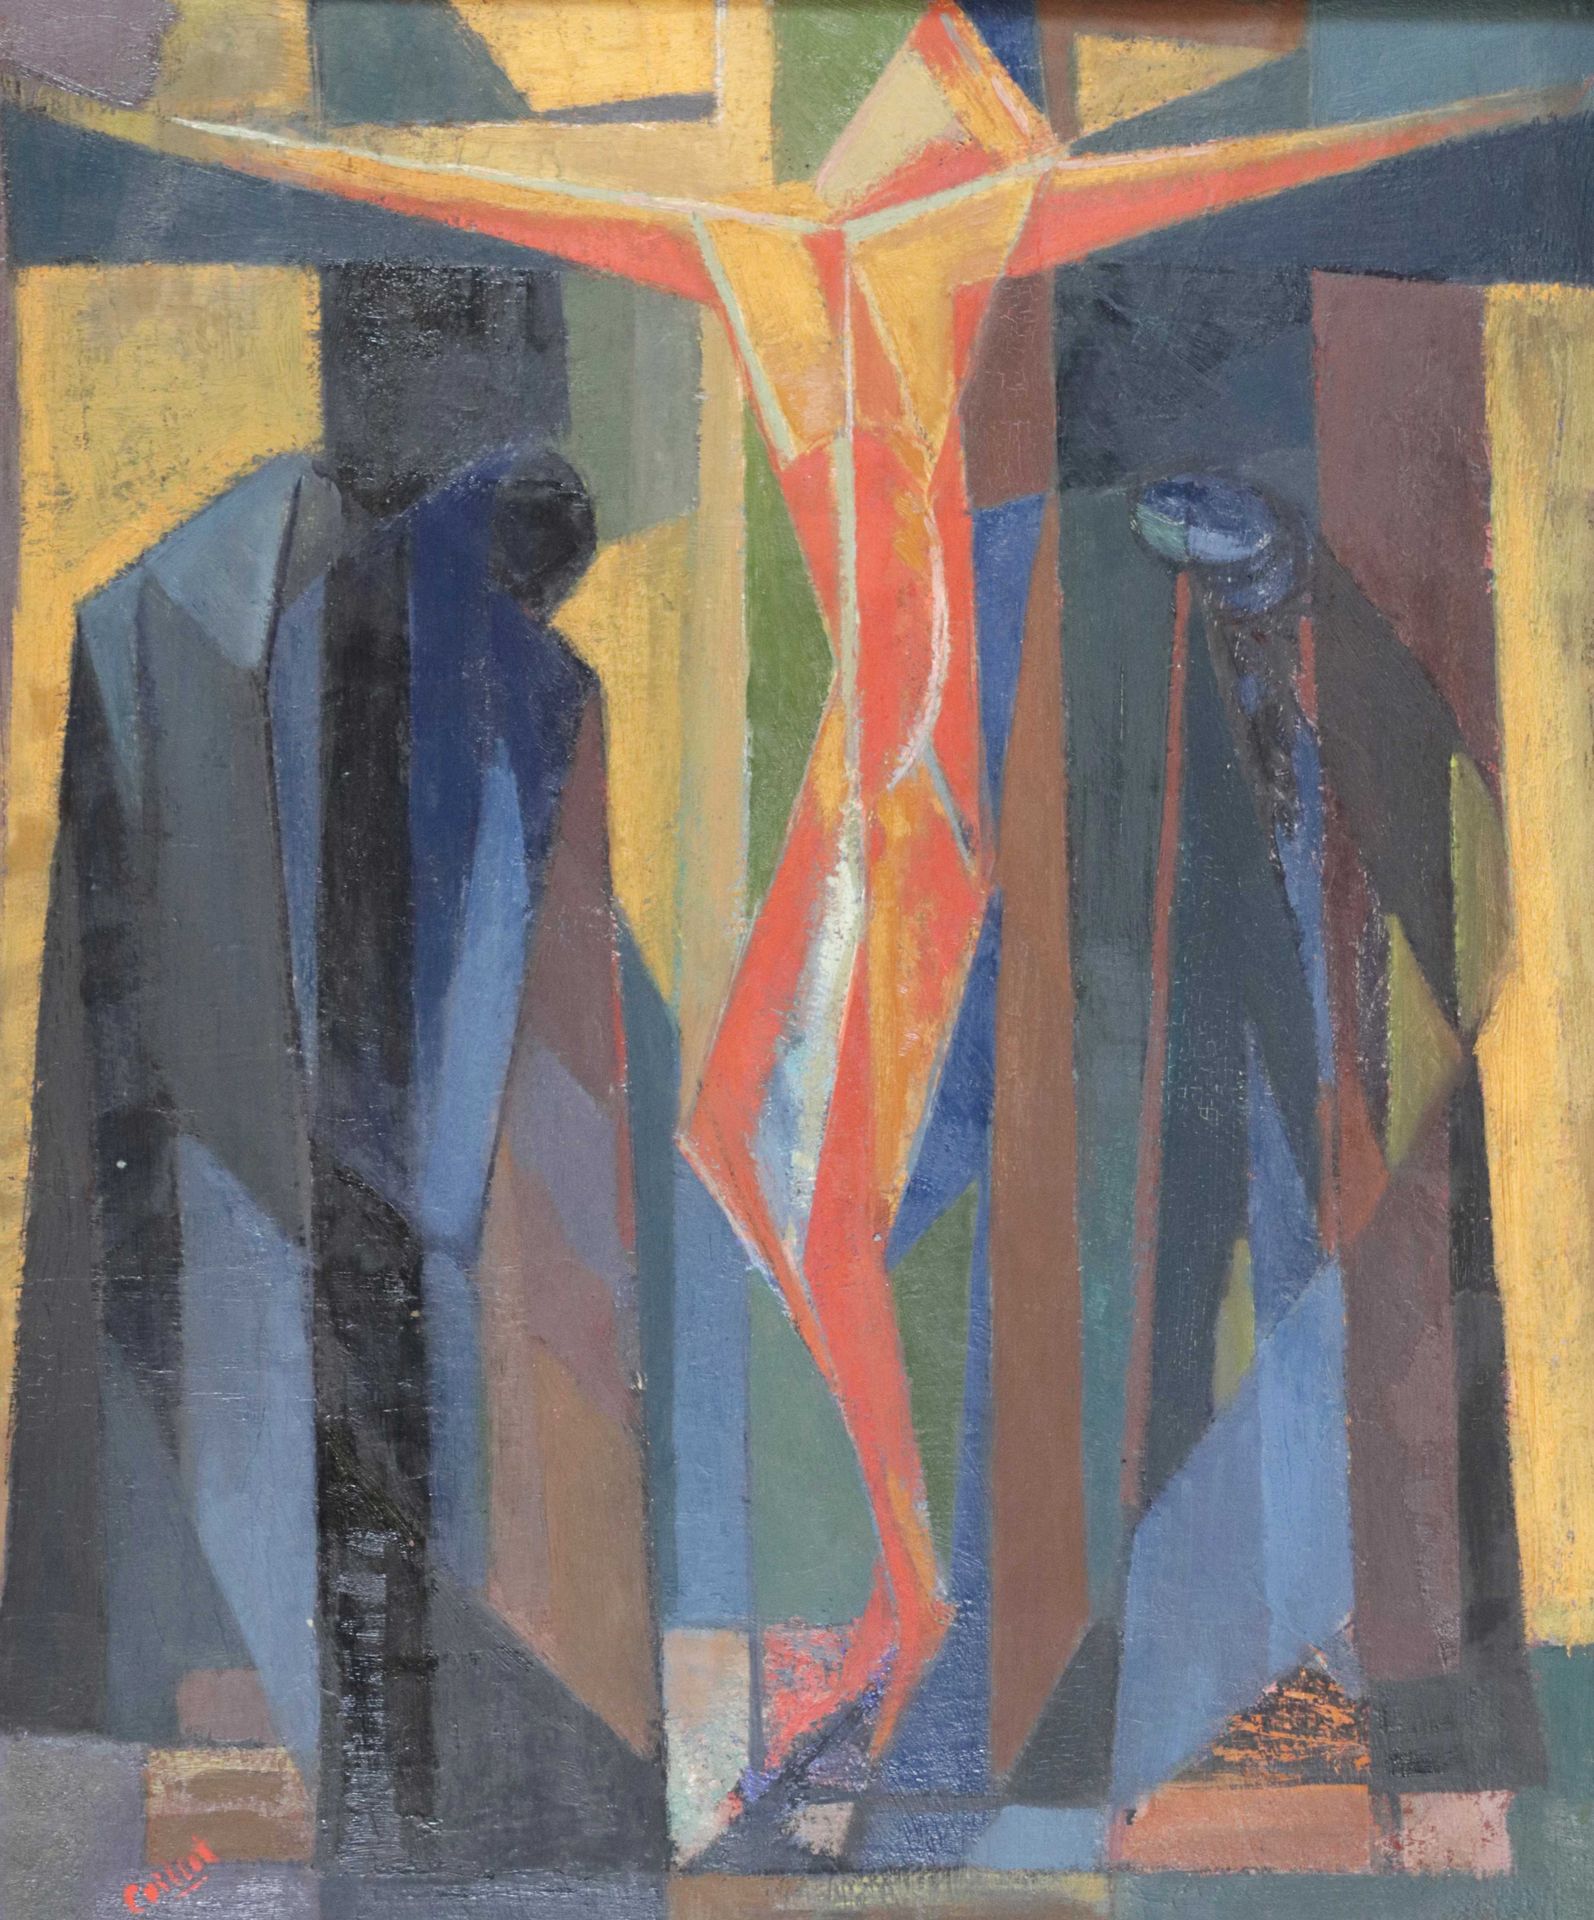 Null Henri CAILLET (XX) "Christ on the cross" hsp sbg 54x45